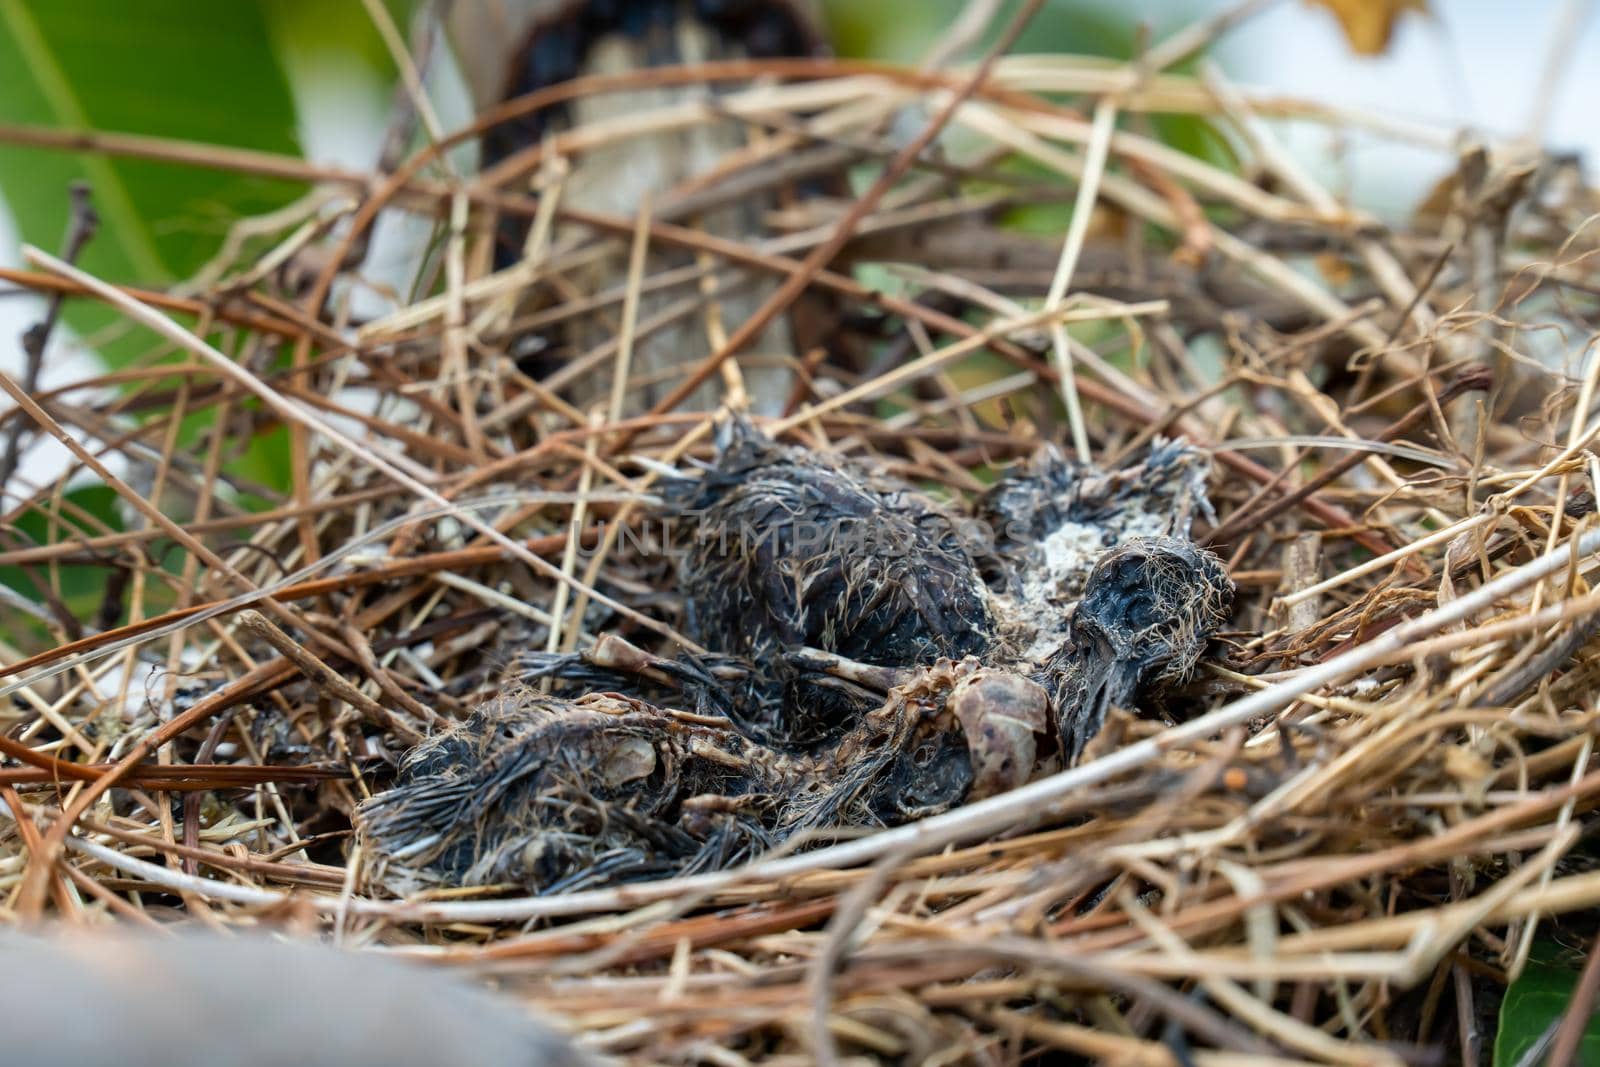 The remains of the baby bird died inside its nest. by chiawth